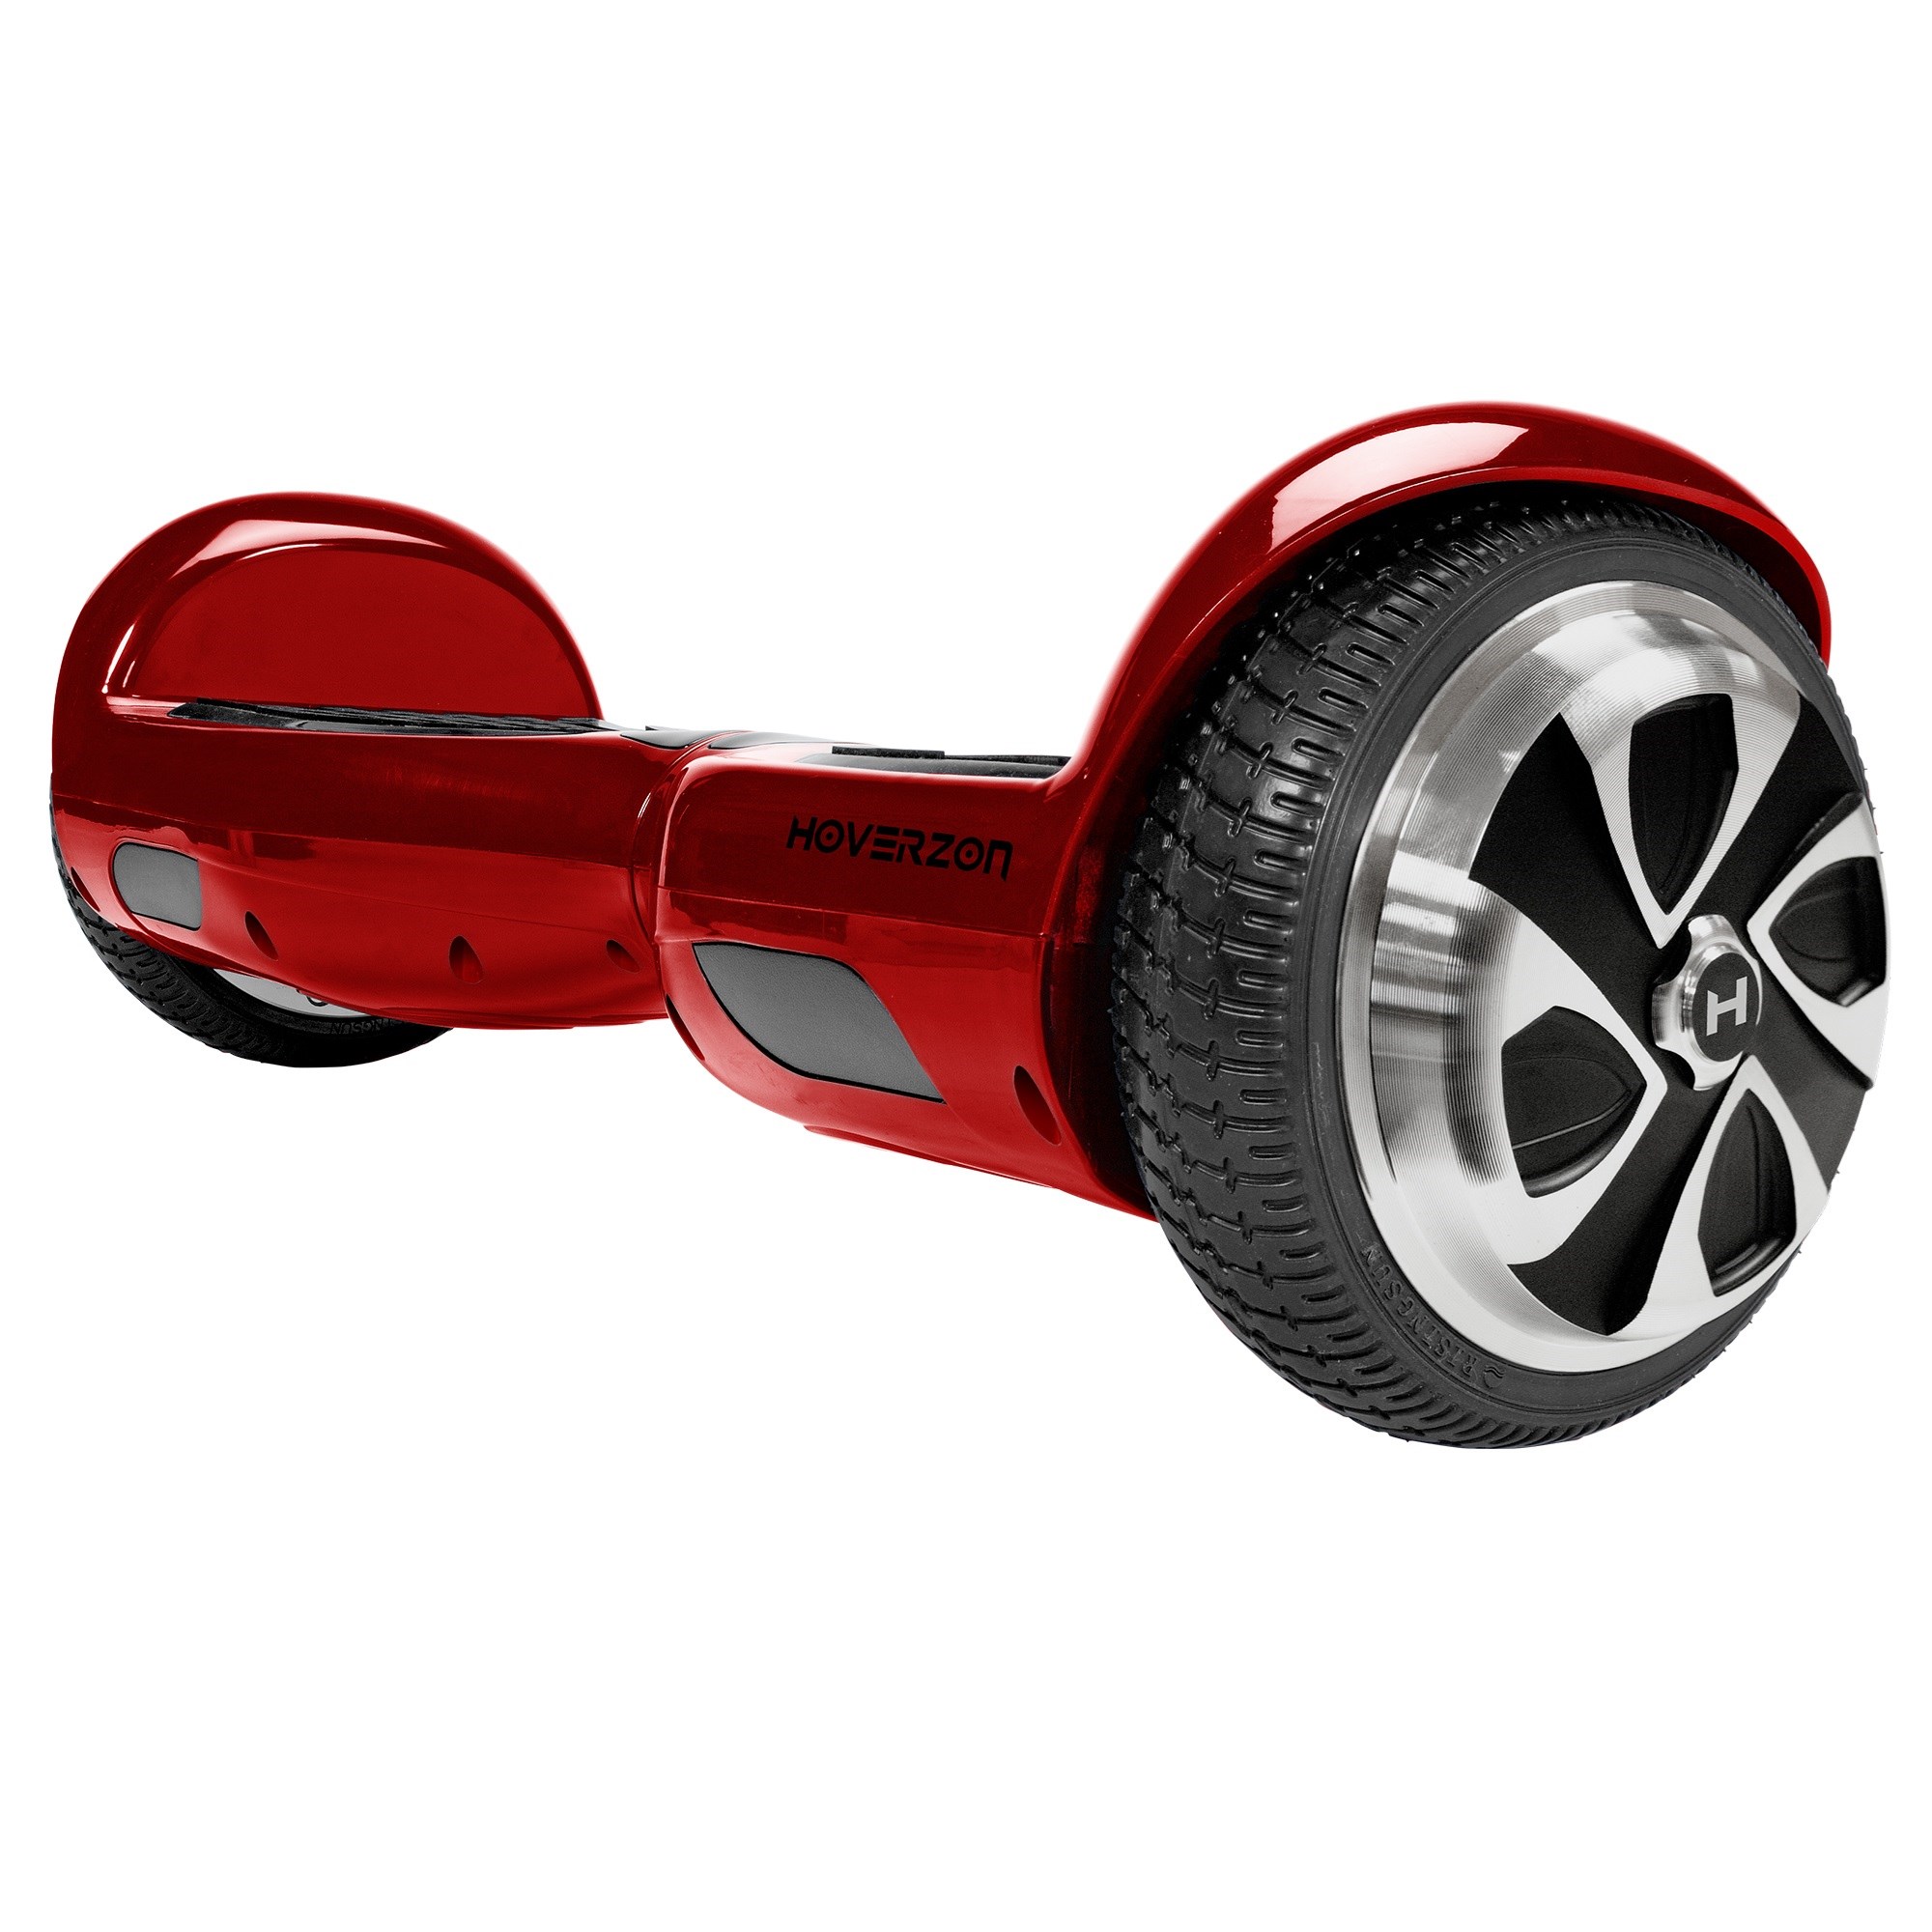 Hoverzone Hoverboard S - Red